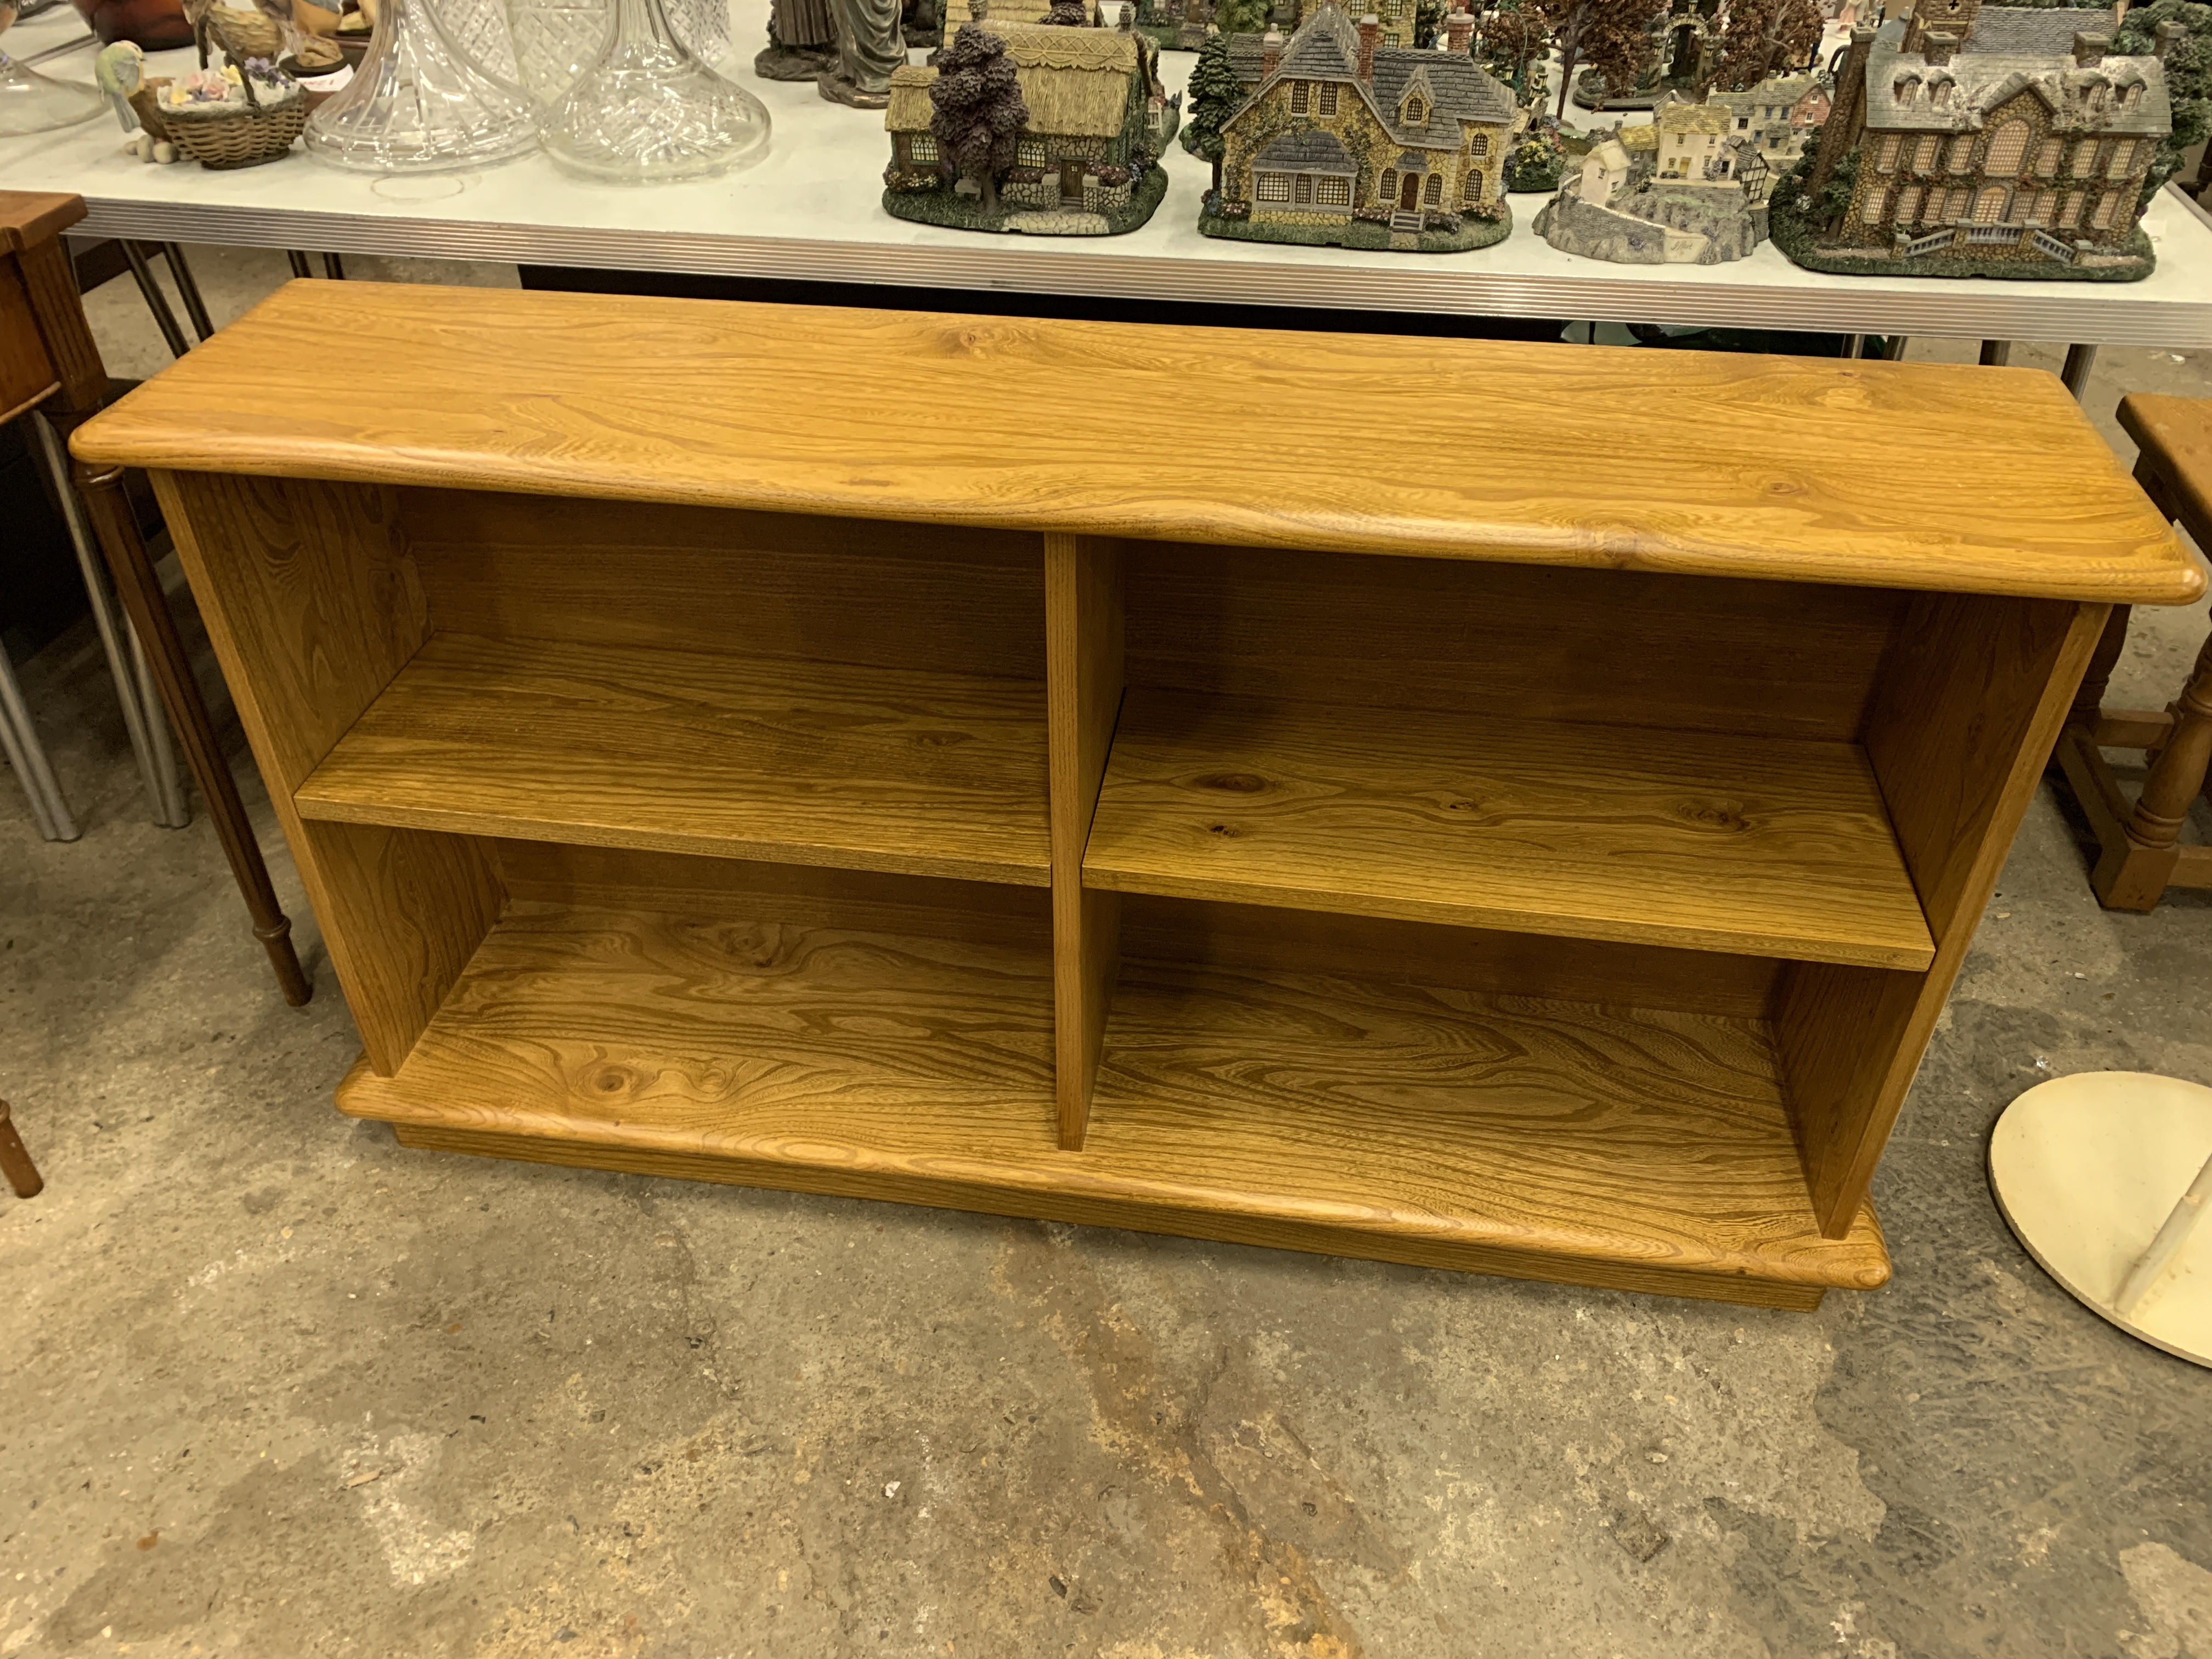 Ercol style open display shelves, - Image 2 of 4